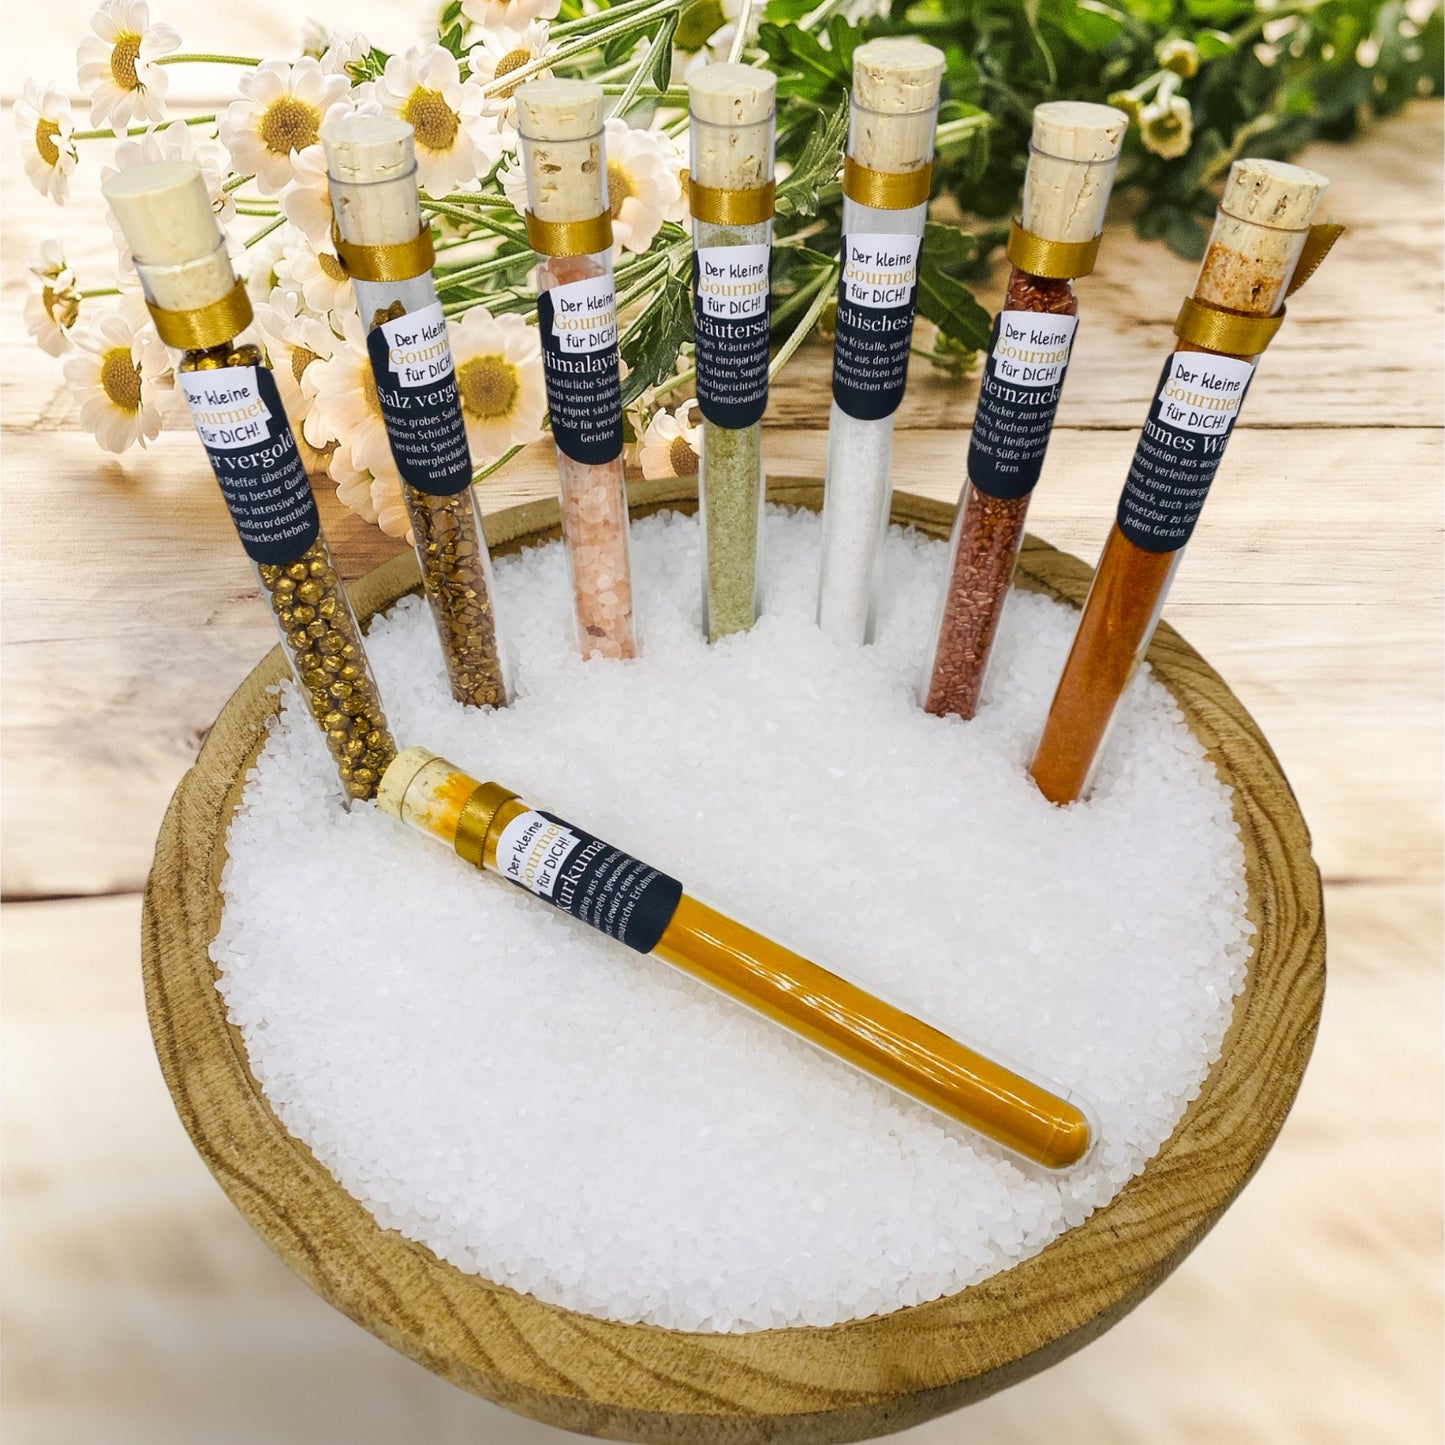 Gourmet test tubes as a gift or party favor: Exquisite variety for gourmets, chefs or kitchen lovers.